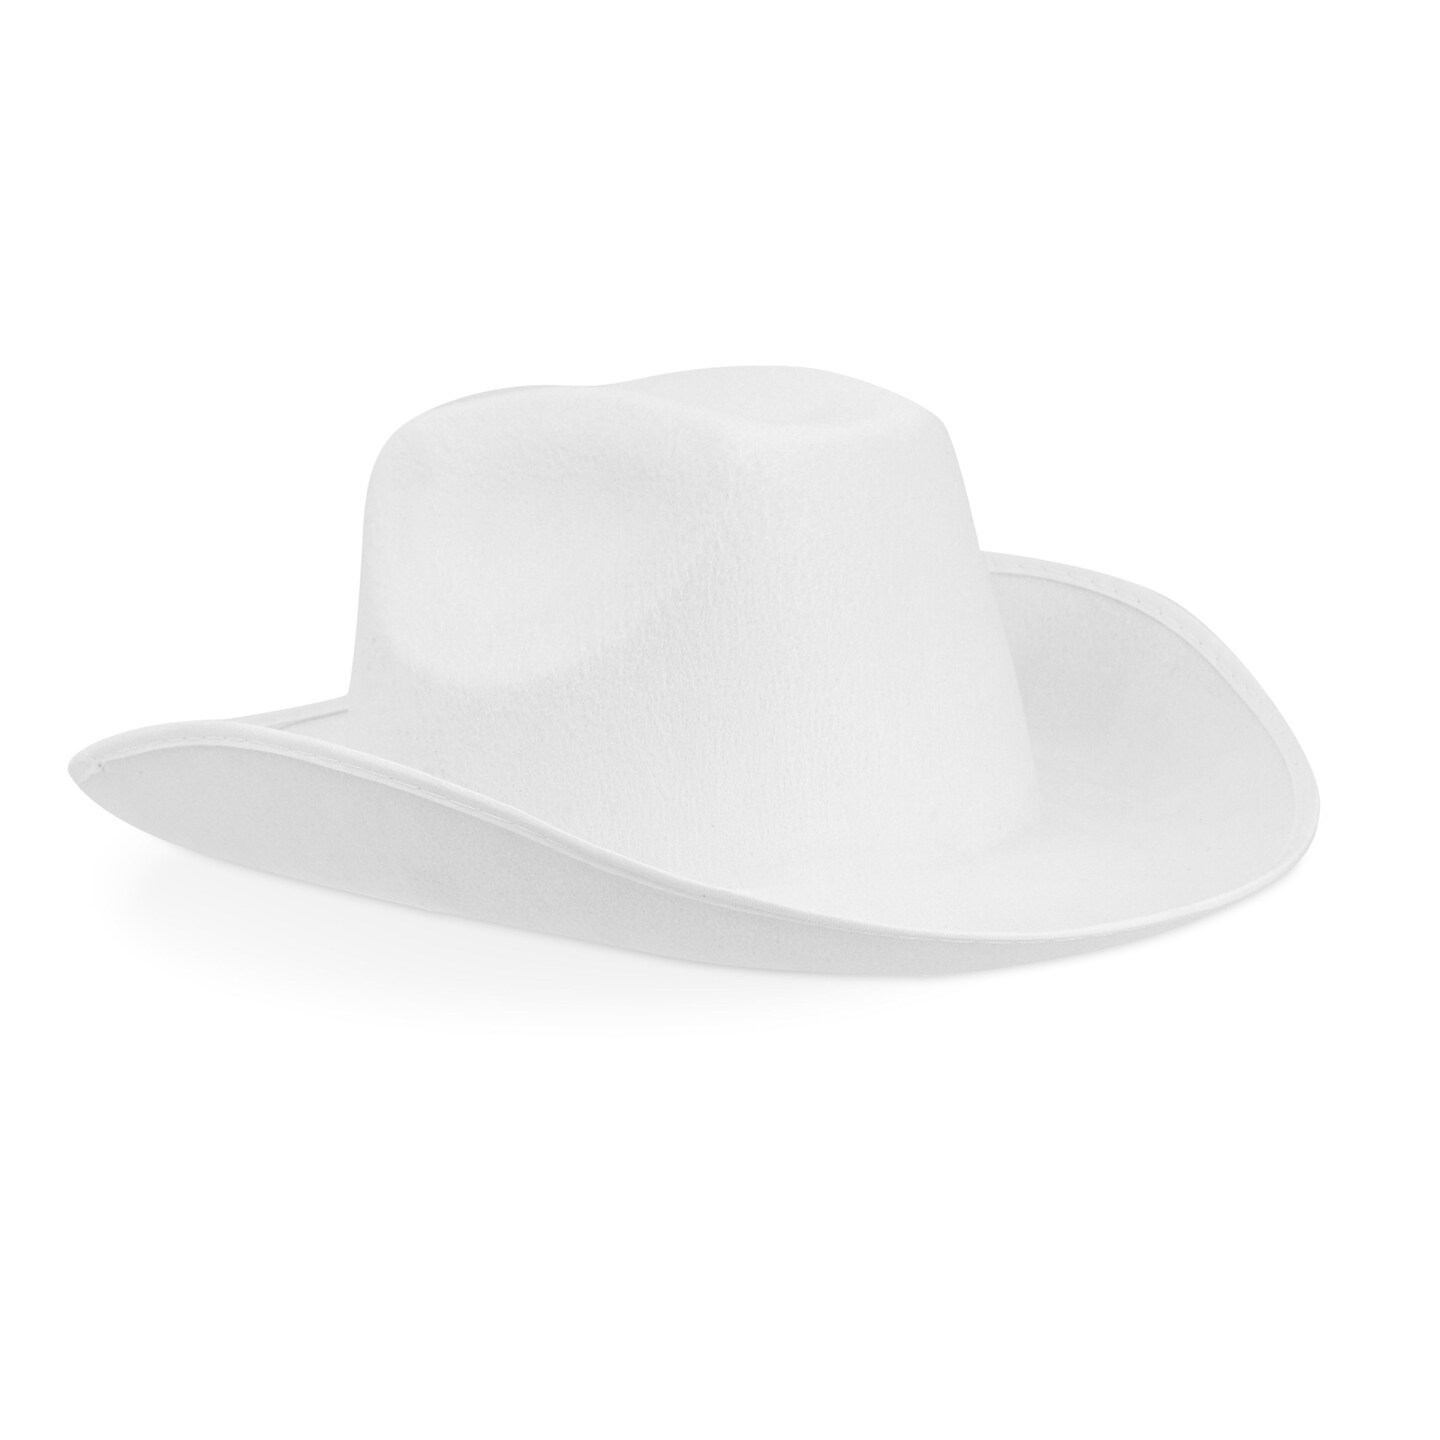 White Cowboy Hat - Felt Cowboy Hats for Men, Women, Western Cowgirl Hat for Costume Birthday Bachelorette Party (Adult Size)